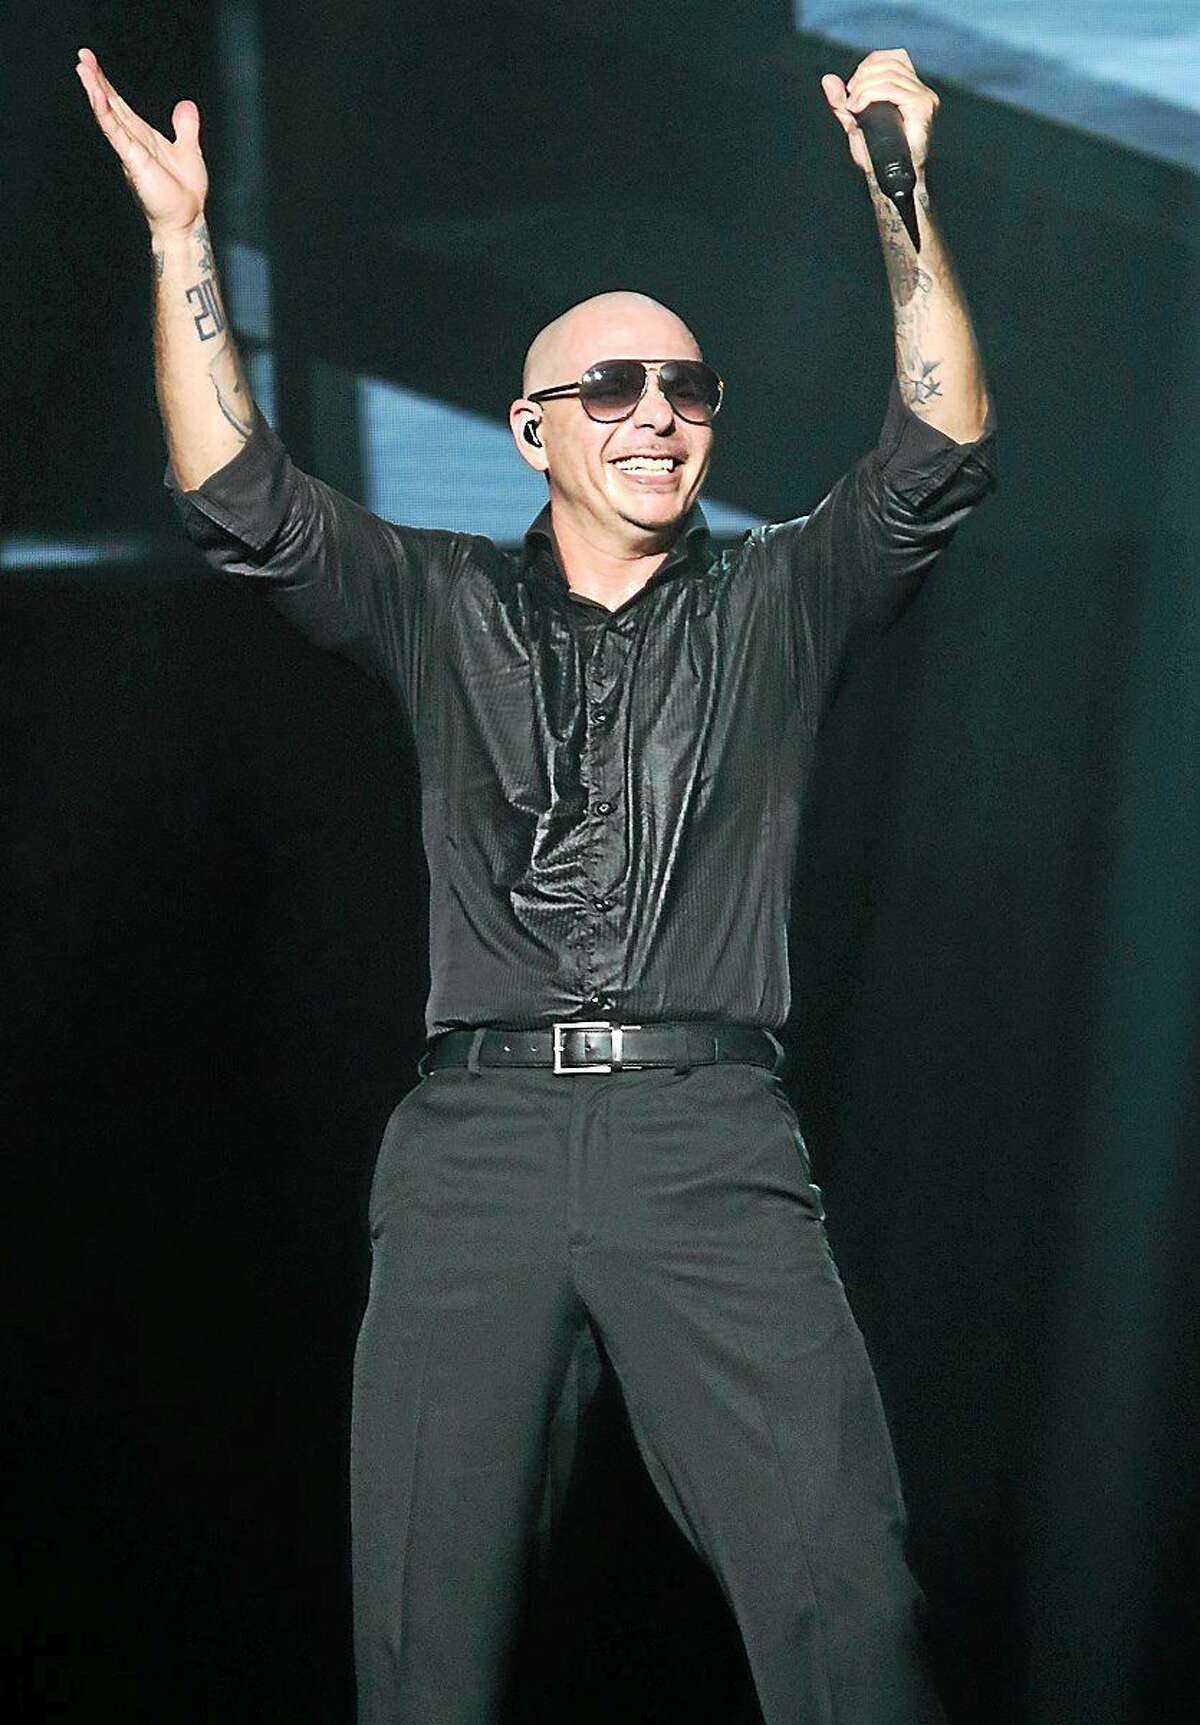 Photo by John Atashian Armando Perez, better known by his stage name Pitbull, is shown entertaining a sold out crowd of his fans at the Foxwoods Resort & Casino on Saturday night May 23. Pitbull is y on tour in support of his eighth studio album,ìGlobalization.î To learn more about the upcoming concerts coming to Foxwoods, visit www.foxwoods.com